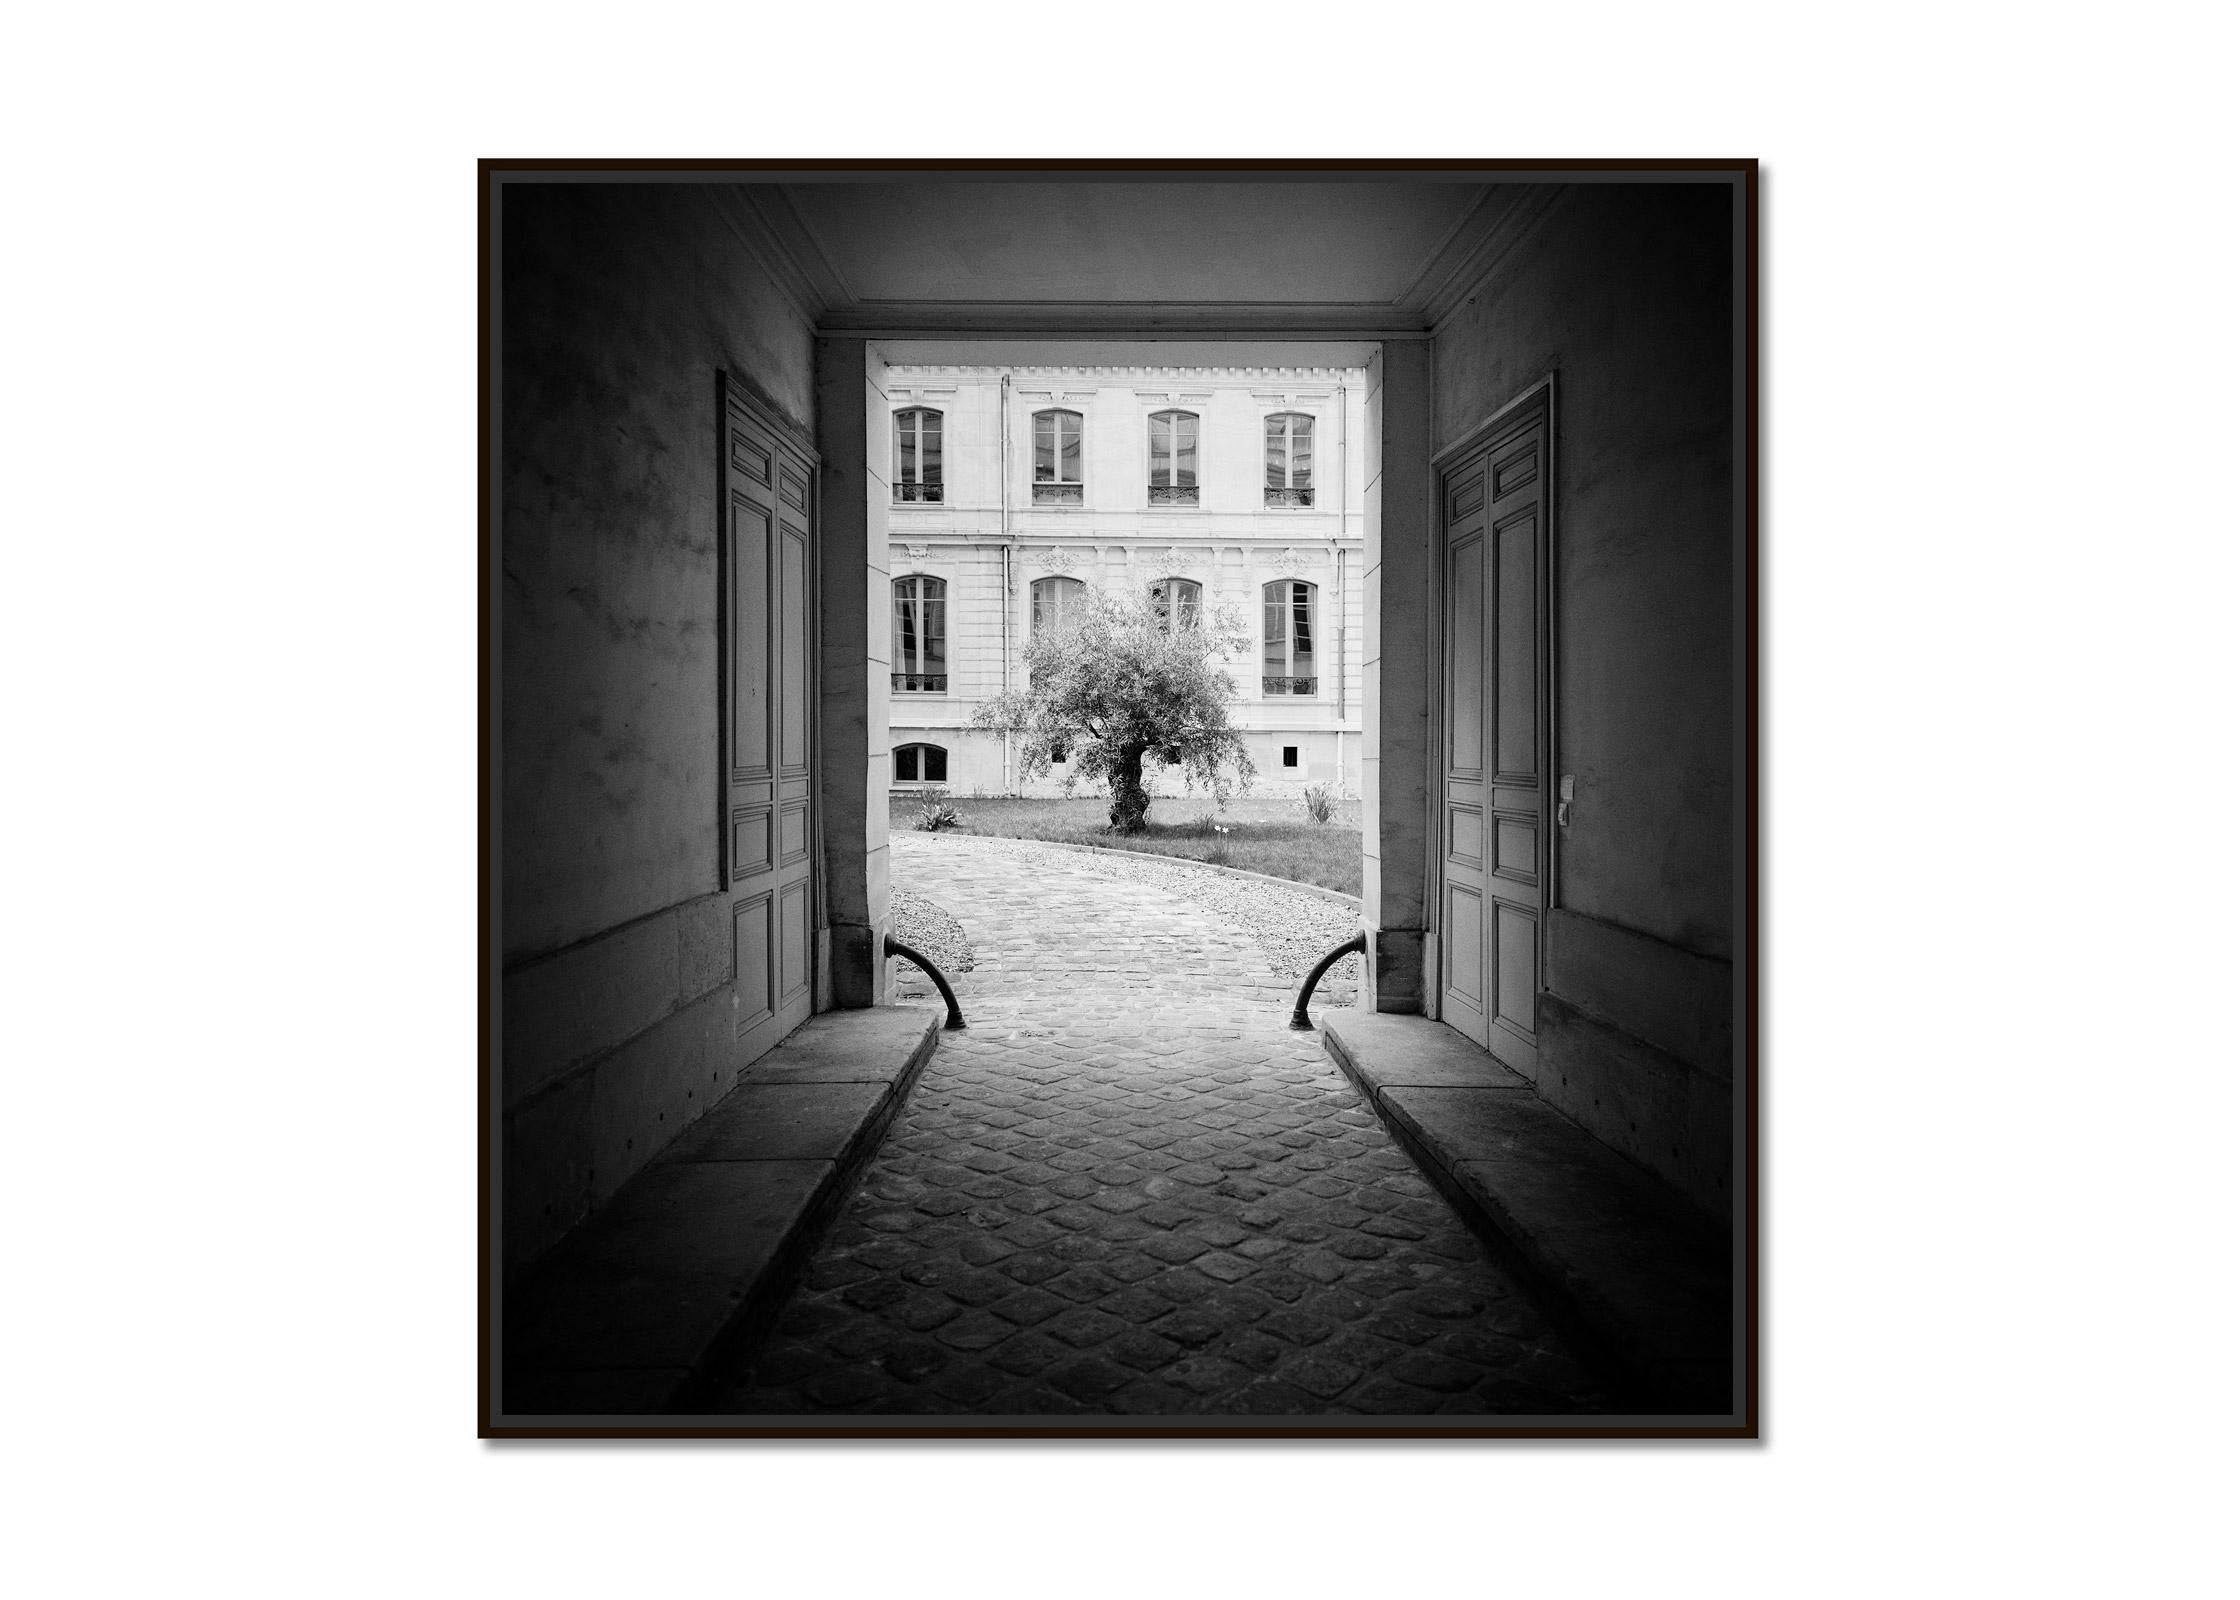 Tree in the Courtyard Paris black white fine art cityscape photography print - Photograph by Gerald Berghammer, Ina Forstinger